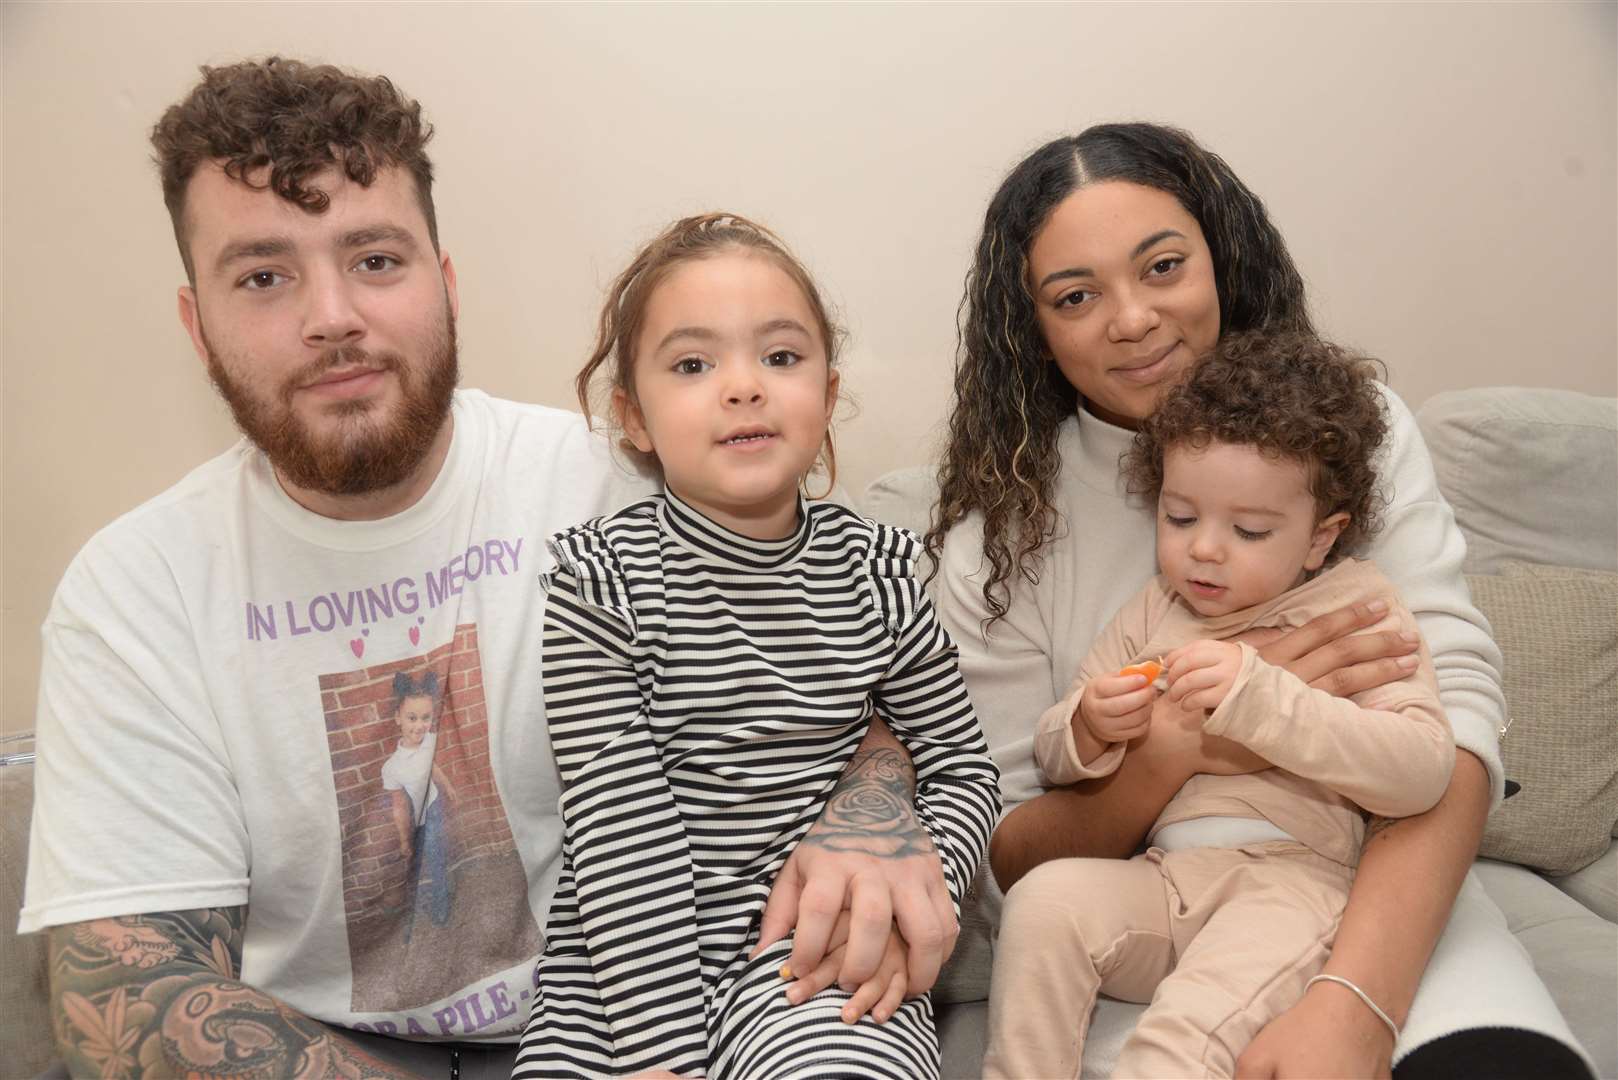 Ada-Ireland Ward and Oscar Pile-Gray of Margate who are nominated for Wards Childrens Awards in the Courageous Family category with parents Ethan Ward and Keisha Pile-Gray. Picture: Chris Davey.